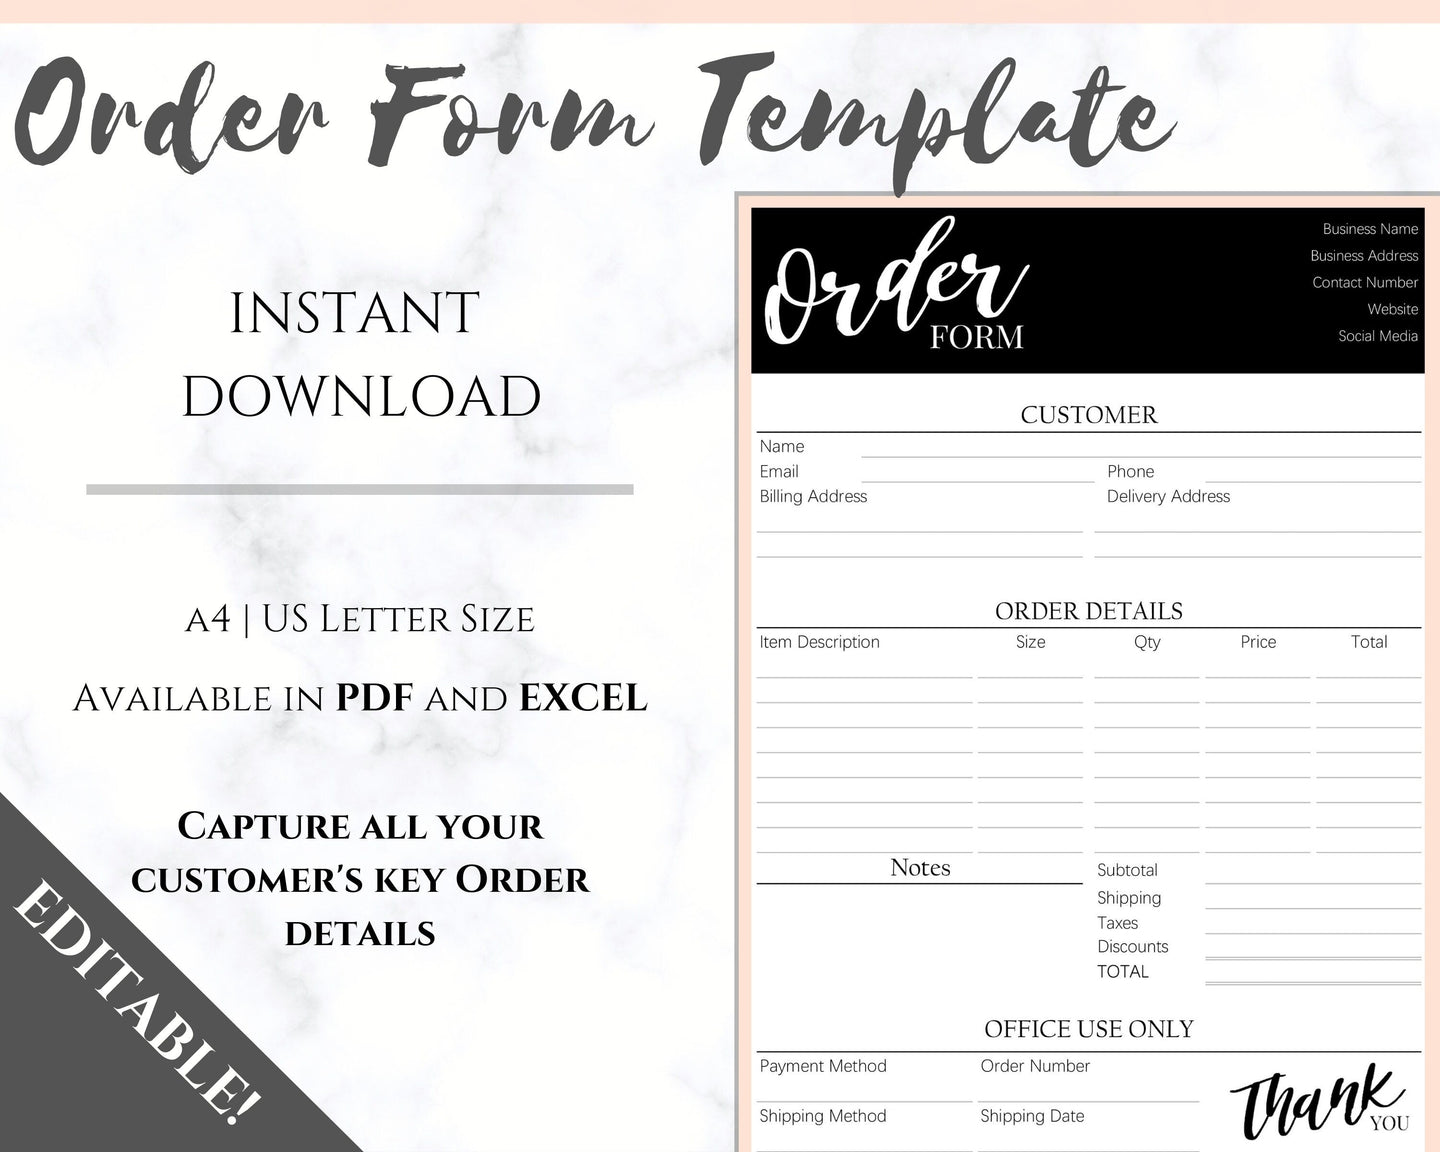 ORDER FORM Invoice Template, EDITABLE Custom Receipt Template, Printable Customer Sales Order Invoice, Receipt Form, Edit, Download A4 Pdf | Style 7